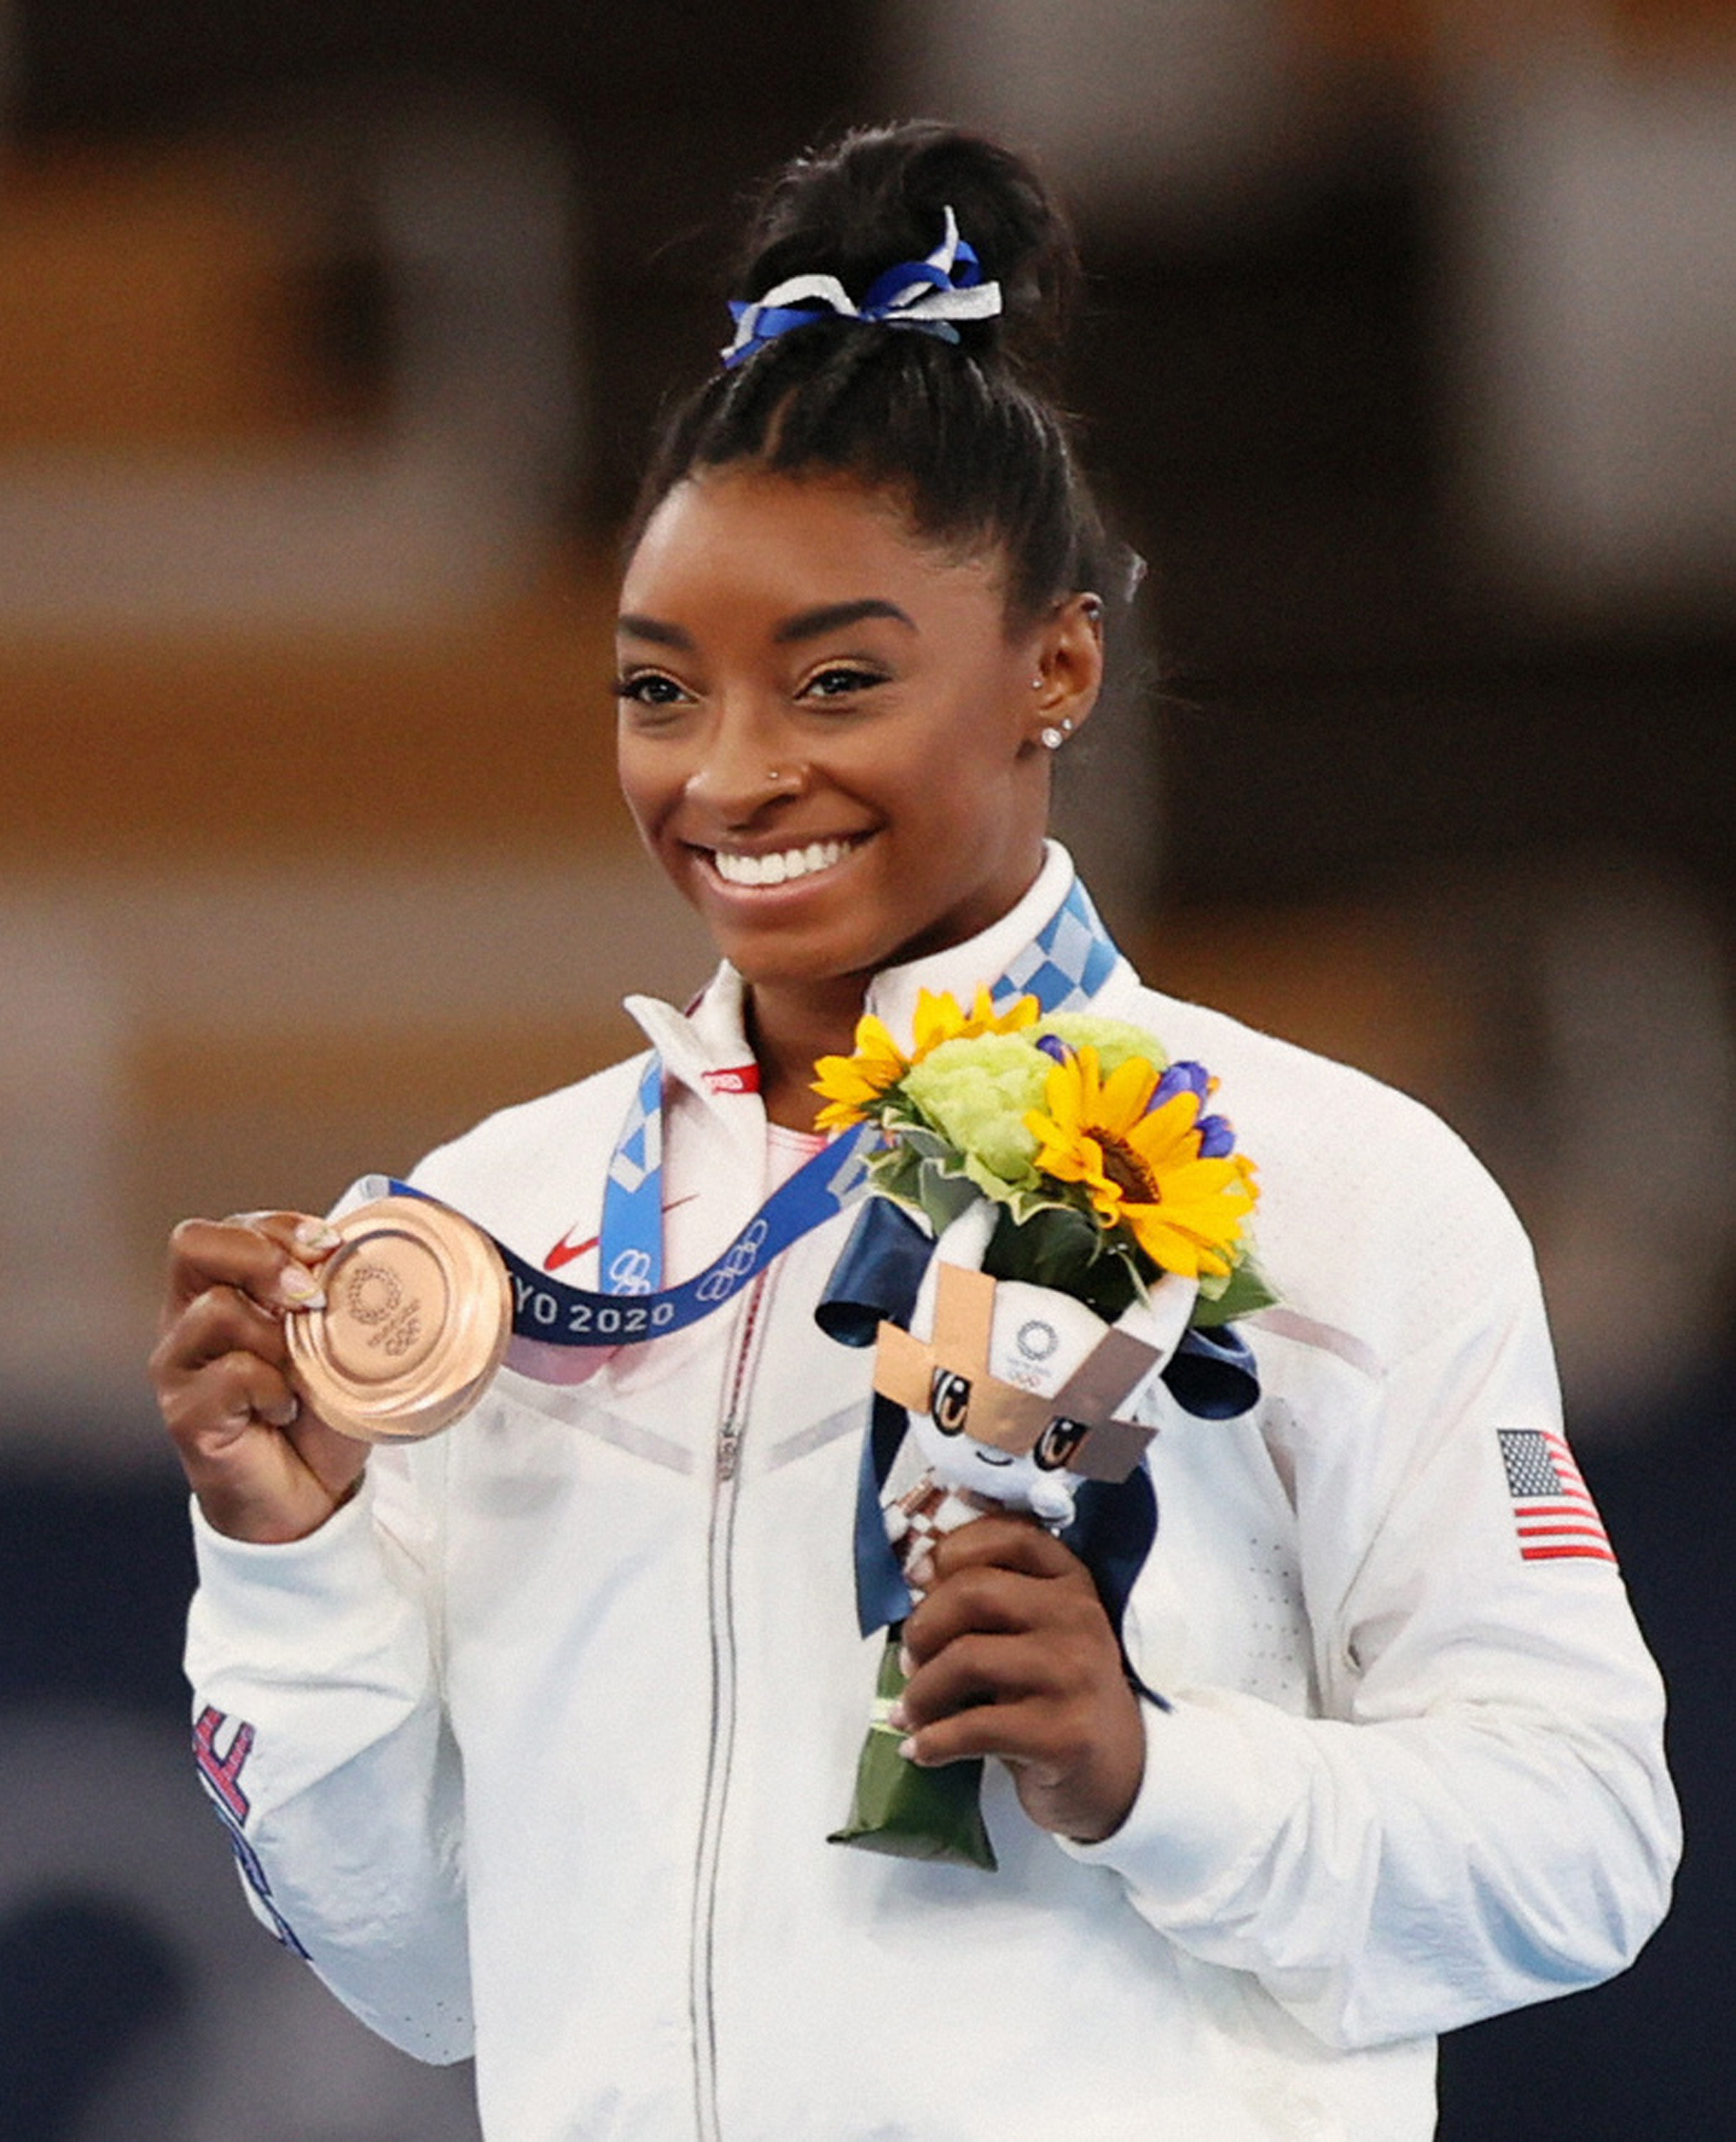 Bronze medalist Simone Biles poses on the podium at the medal ceremony for the Balance Beam on day eleven of the Tokyo 2020 Olympic Games at Ariake Gymnastics Centre on August 3, 2021 in Tokyo, Japan | Source: Getty Images